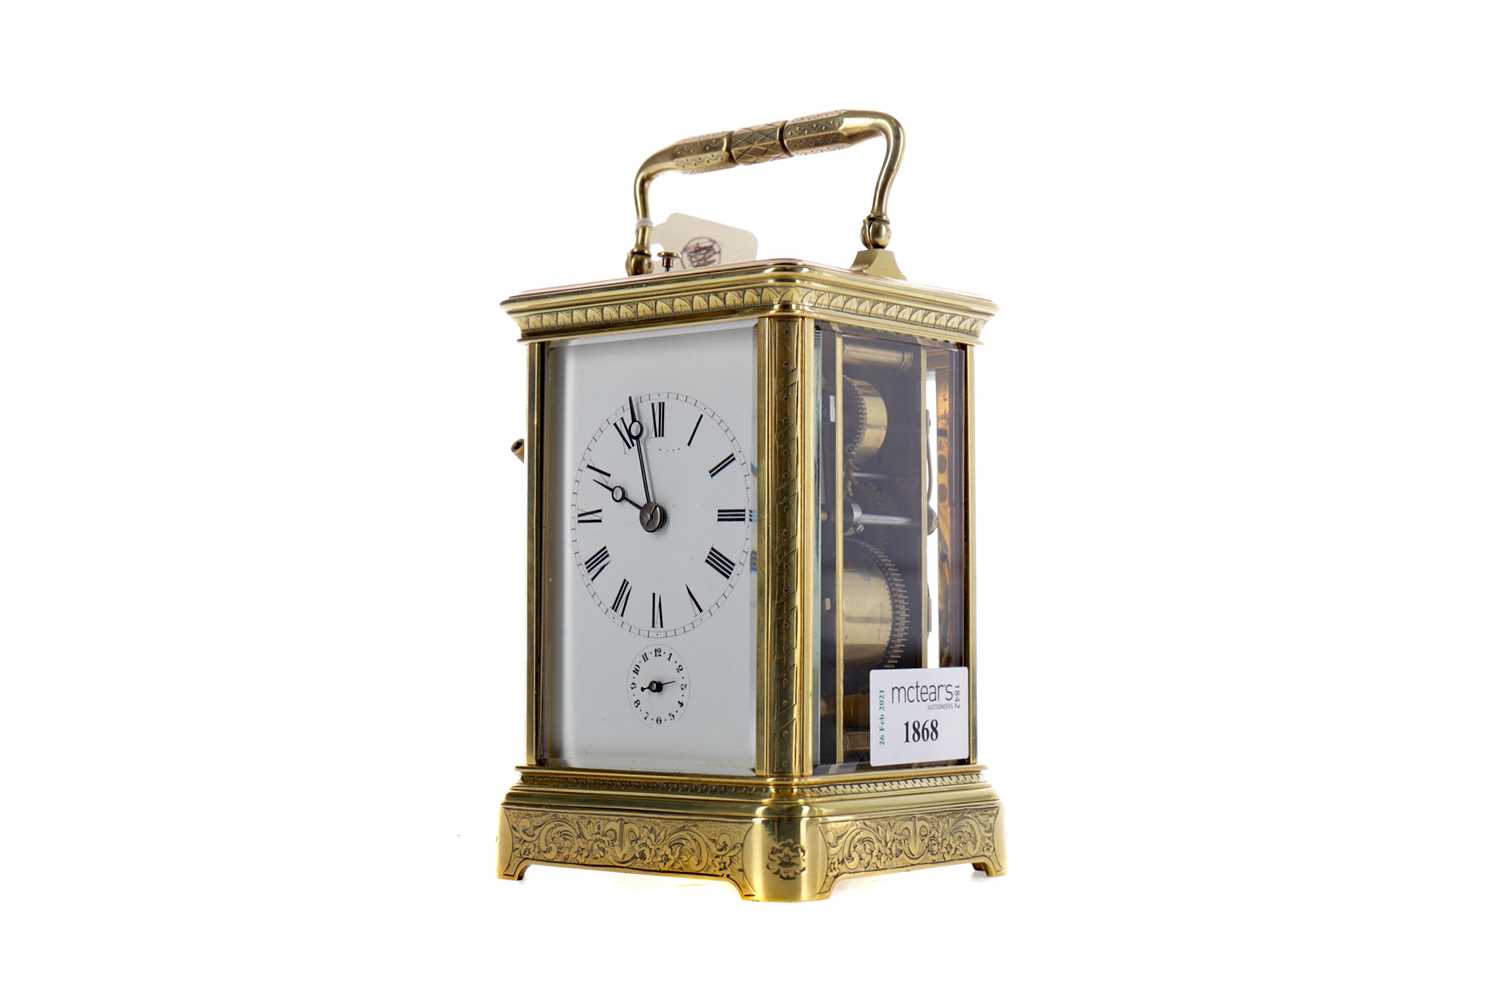 Lot 1868 - AN EARLY 20TH CENTURY REPEATER CARRIAGE CLOCK